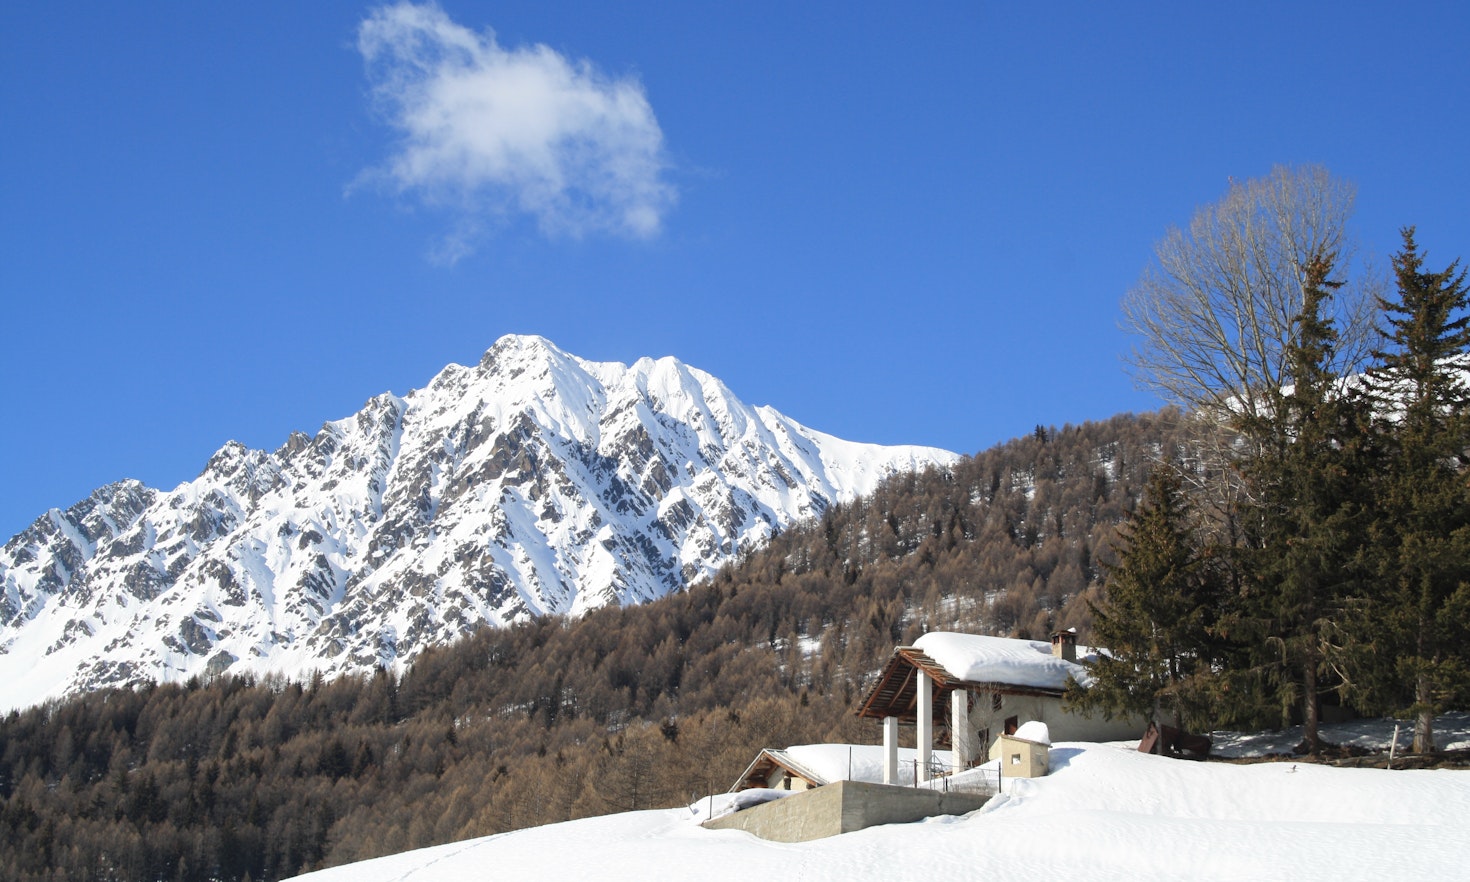 Languages in Aosta Valley – An initial less conventional picture from the inside